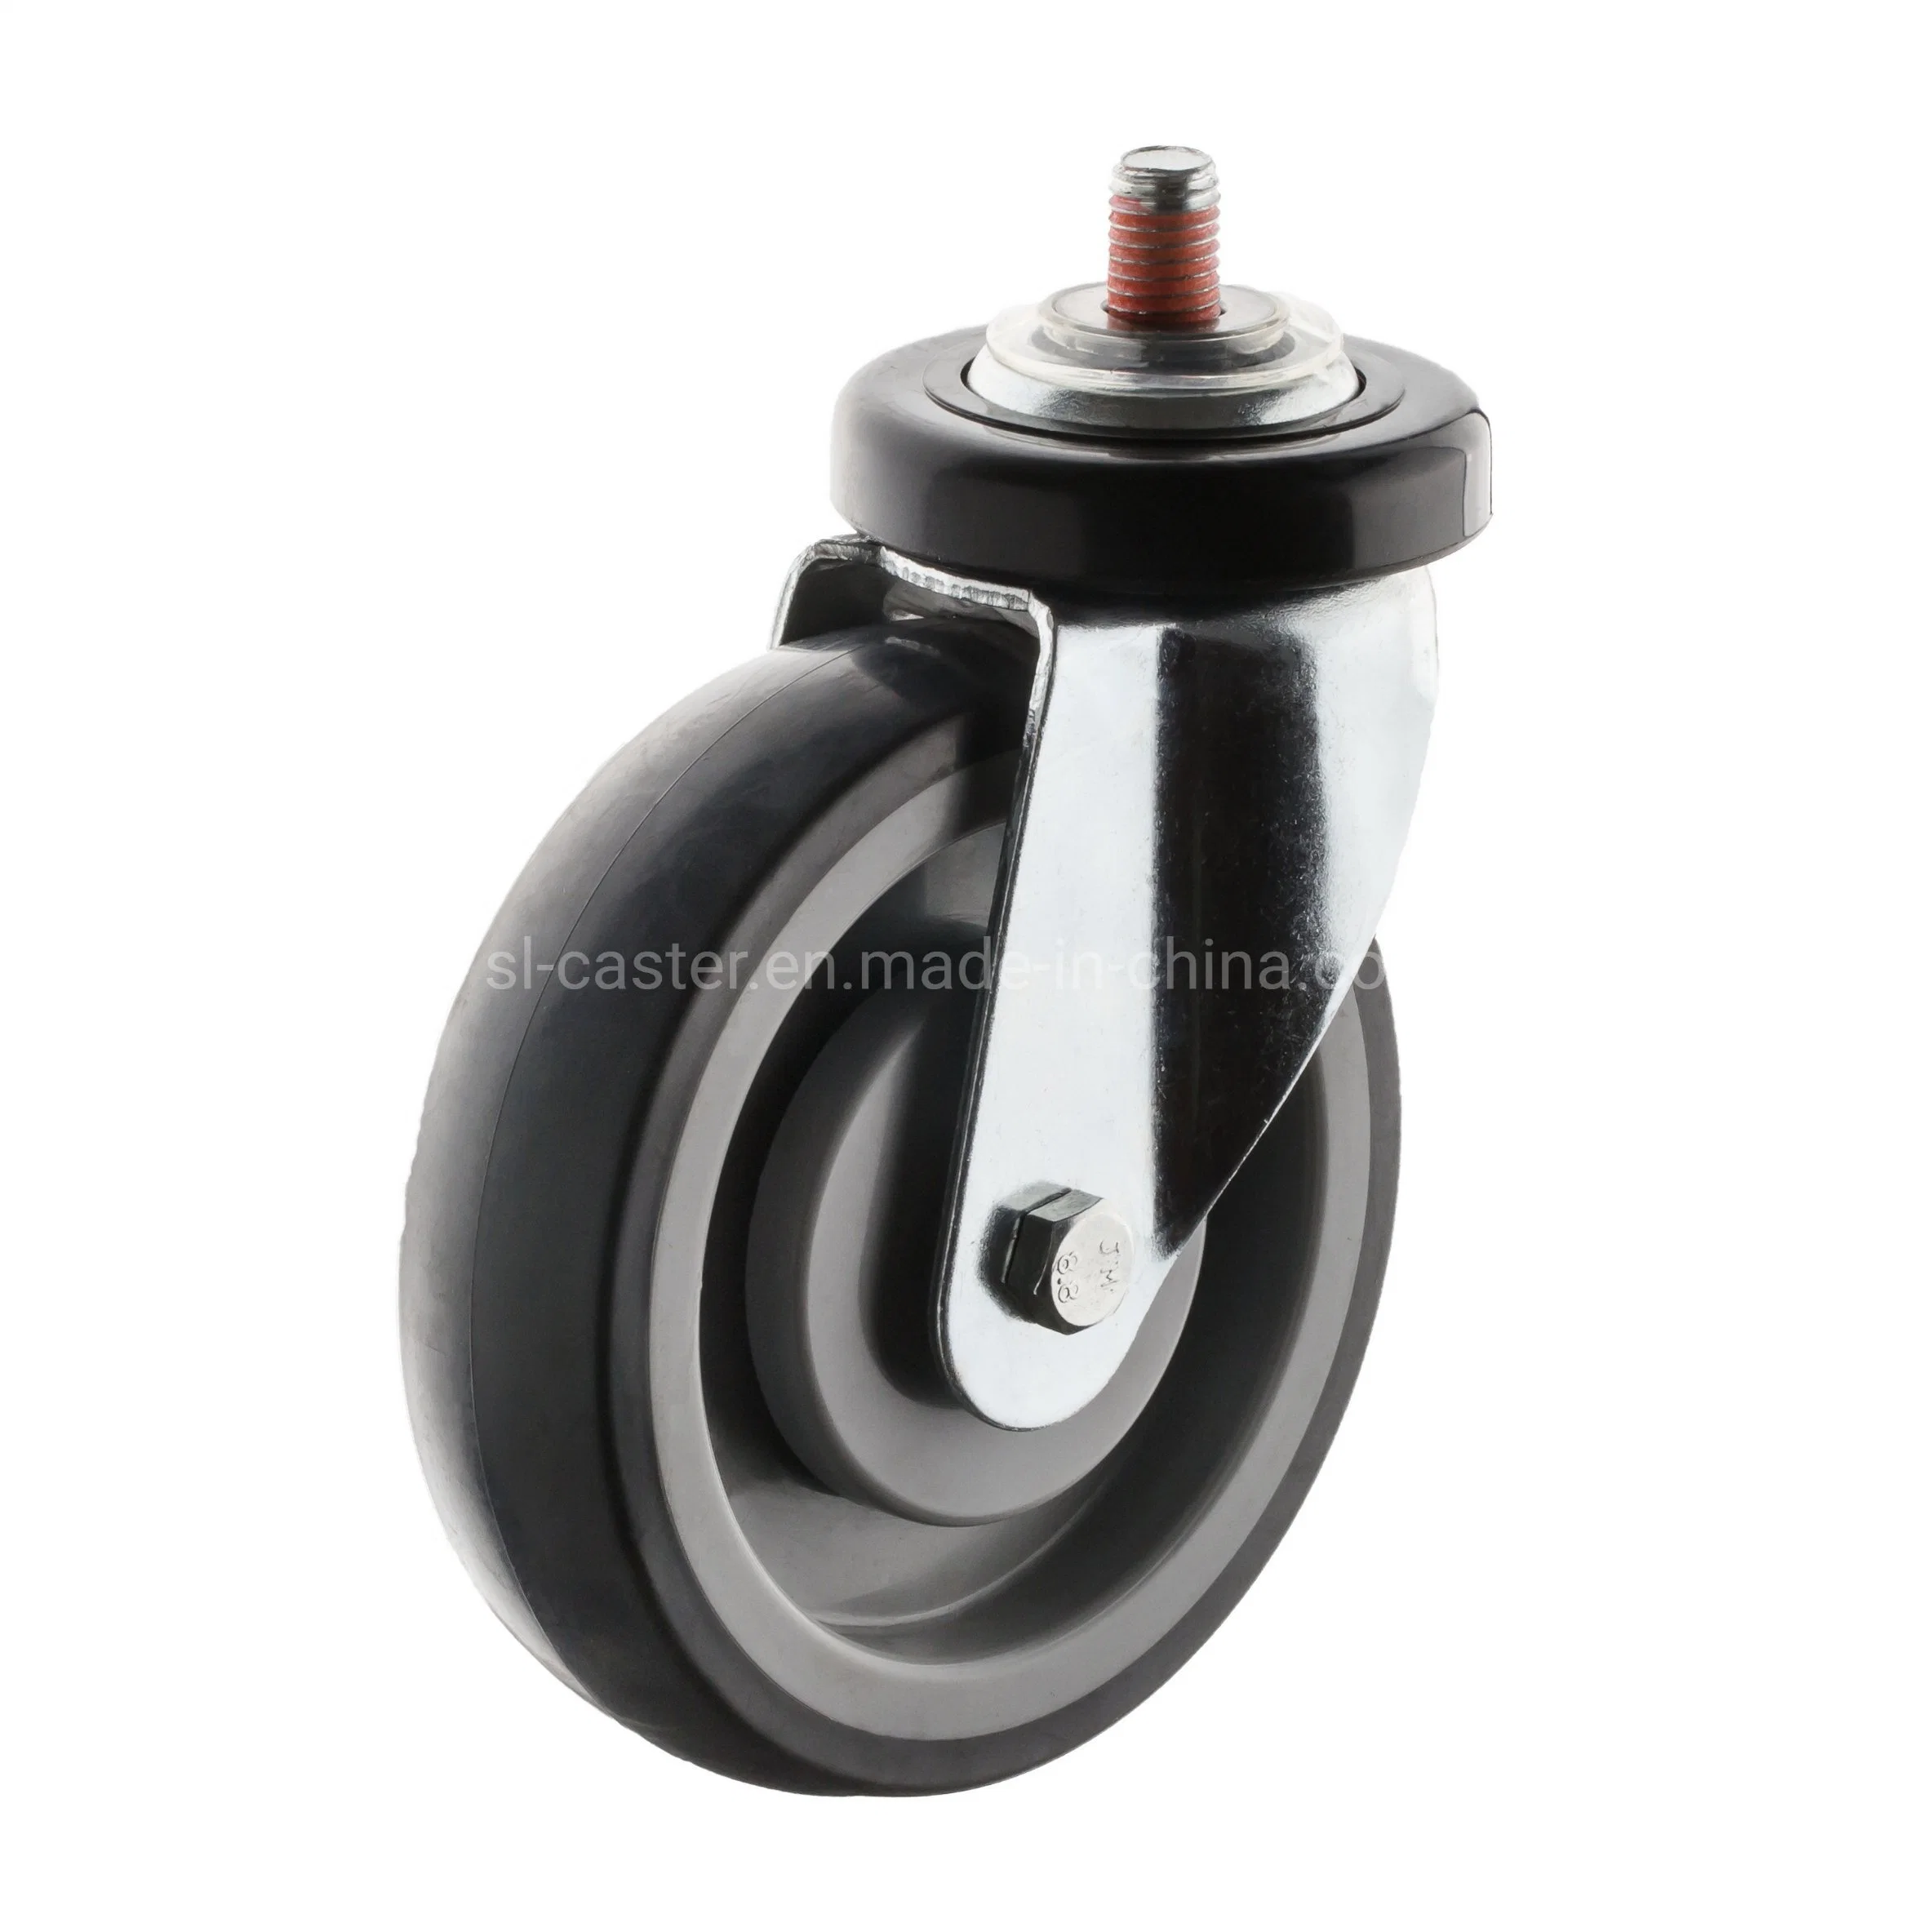 75mm Casters for Shopping Trolley